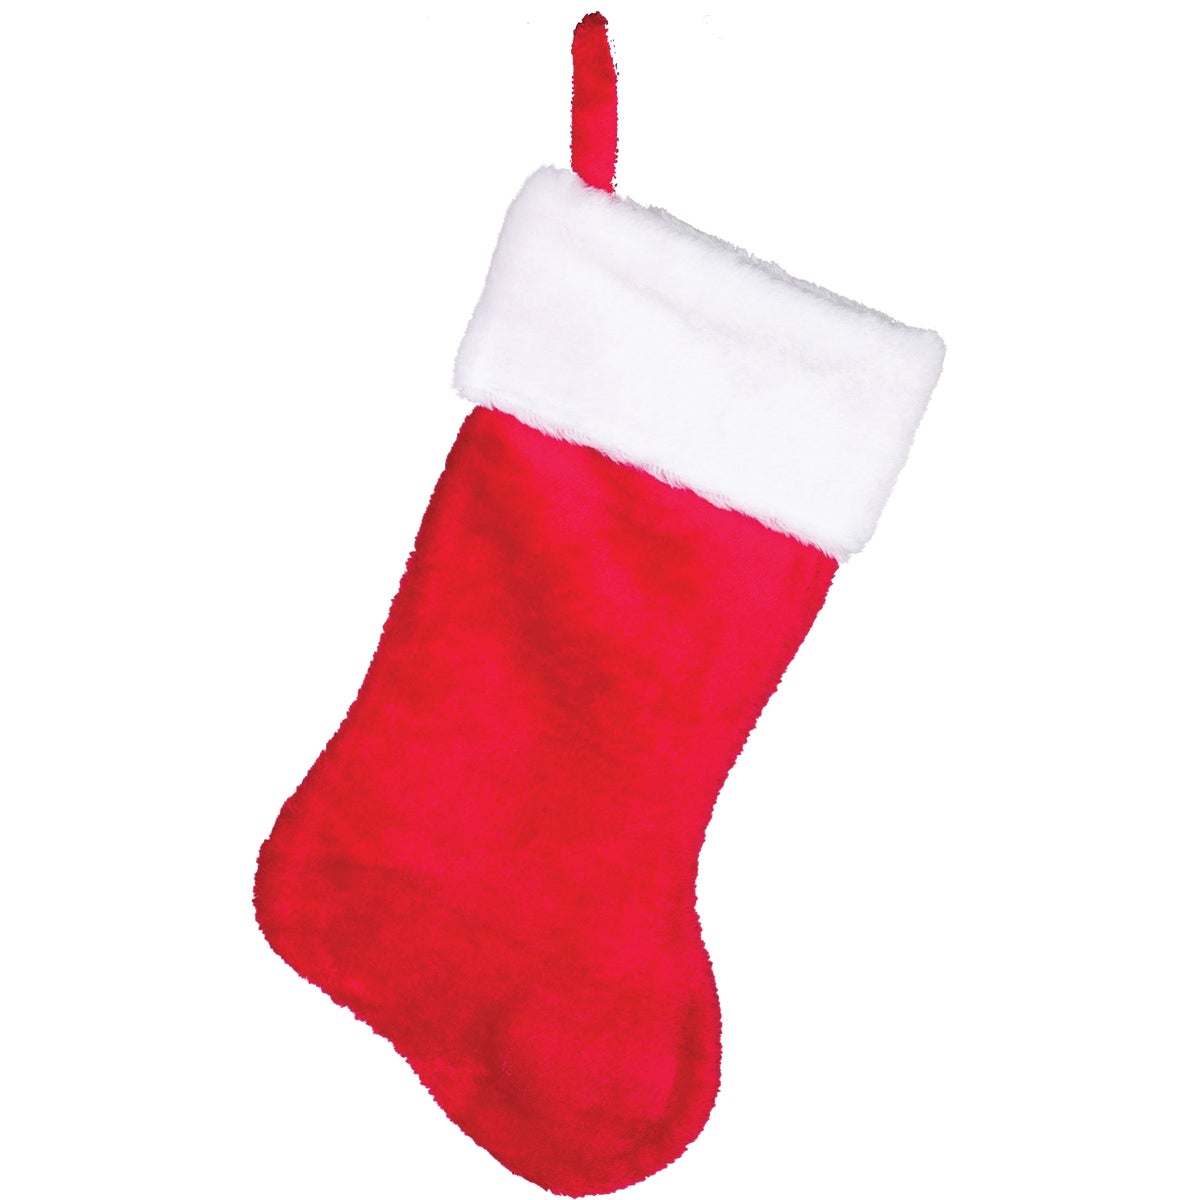 Item 900149, 17-inch plush red stocking. Features a white cuff.